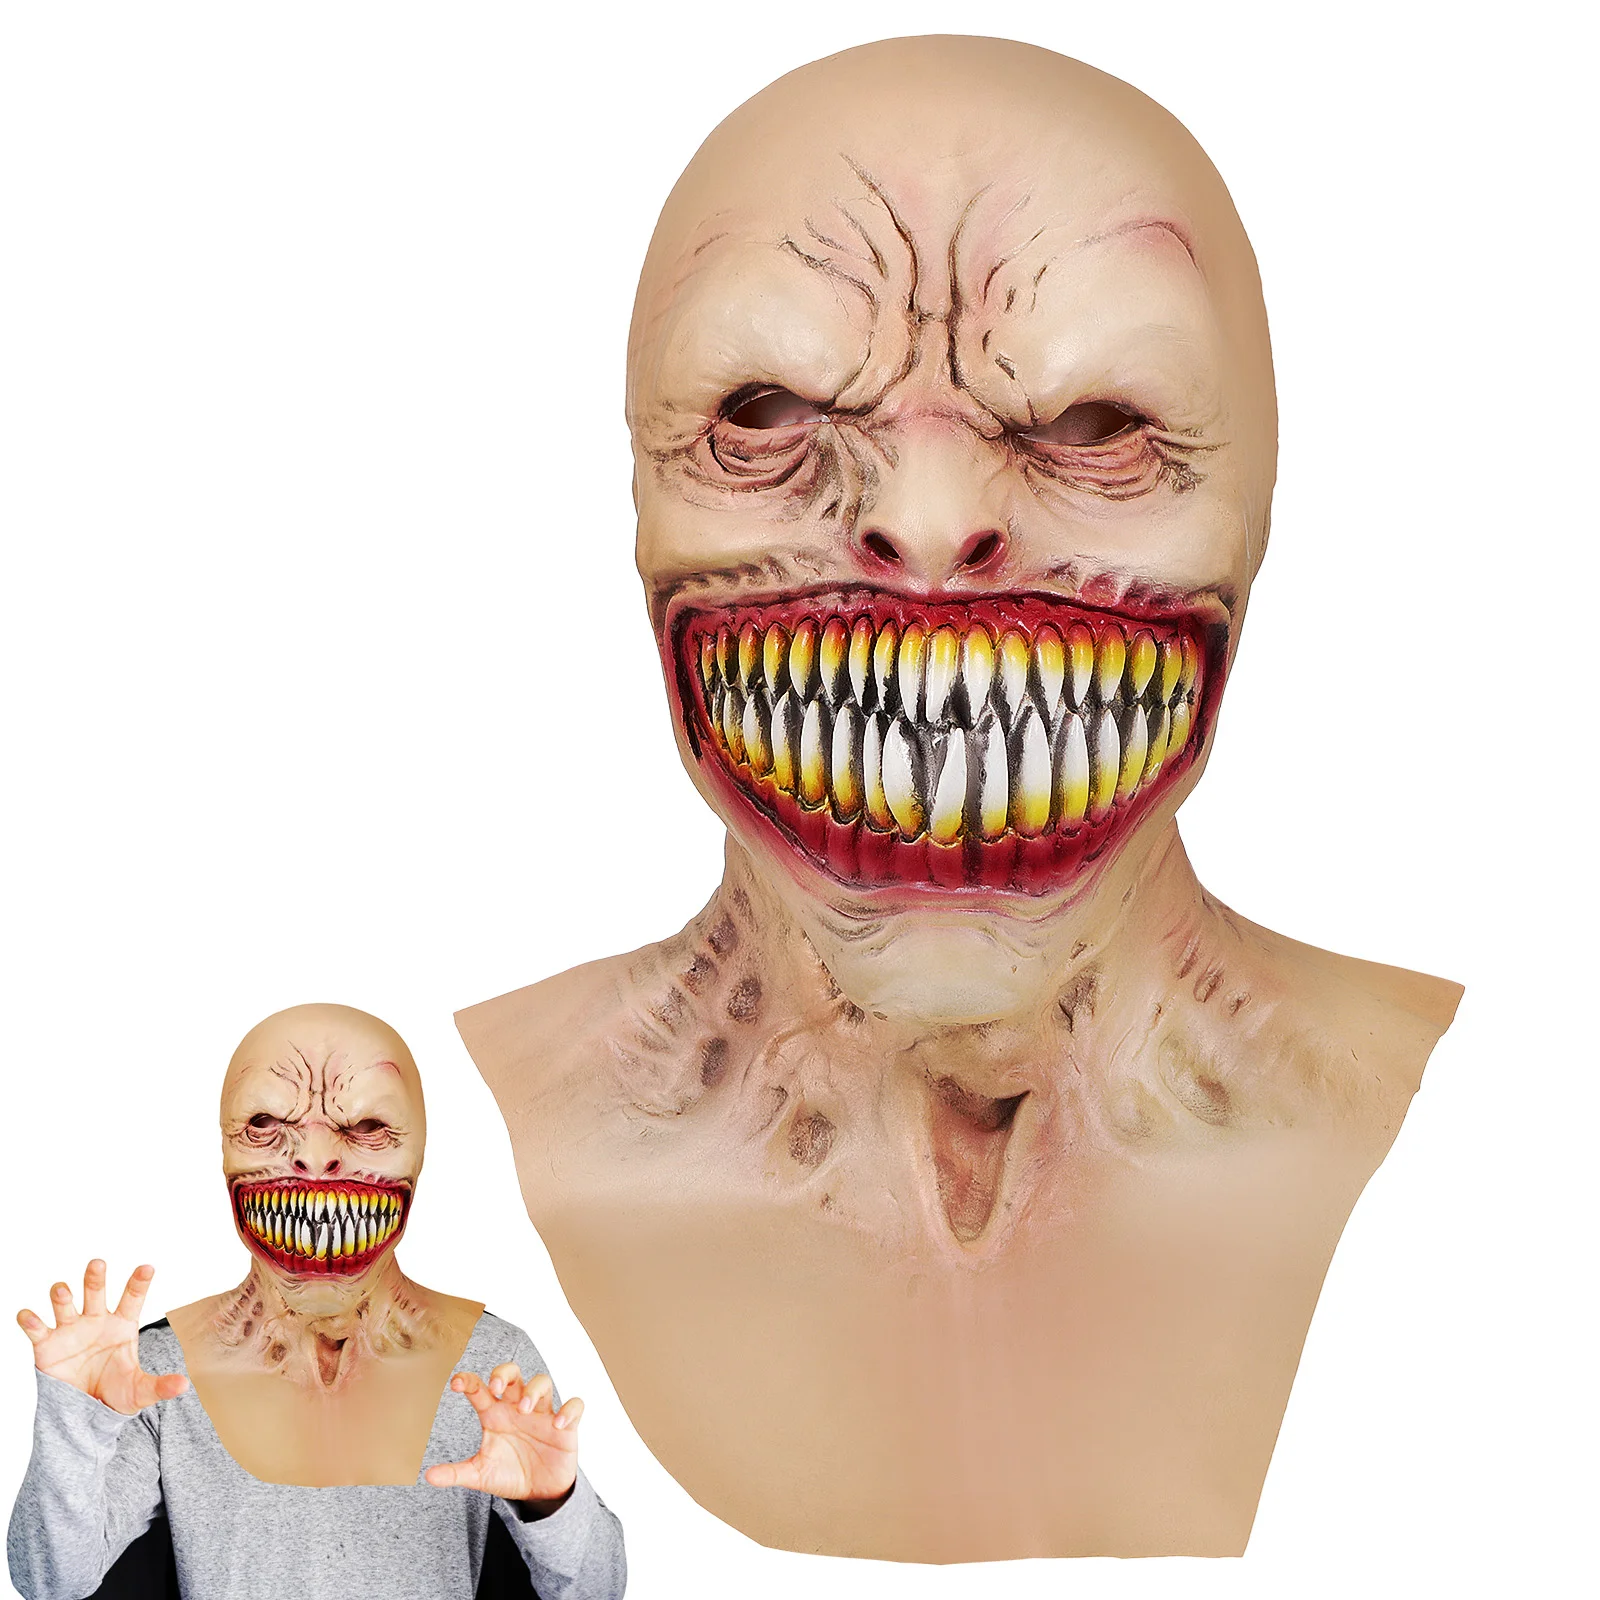 

Mask Headdress The Scary Halloween Props Horror Realistic Emulsion Zombie Adult Novelty Party Supplies Photo Booth